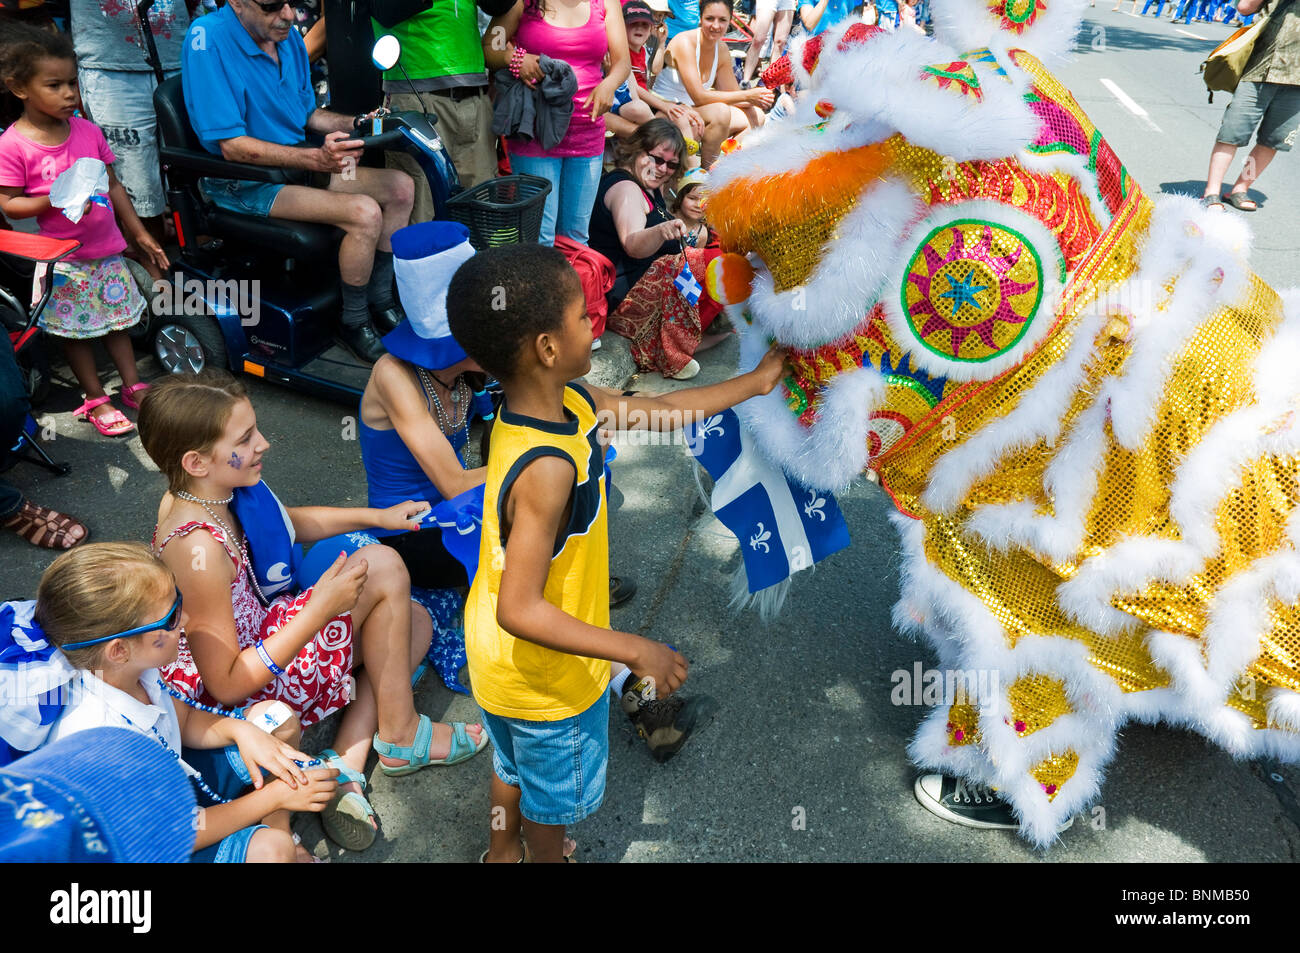 Chinese community celebrating St Jean Baptiste day in Vibrant multicultural city of Montreal Canada Stock Photo